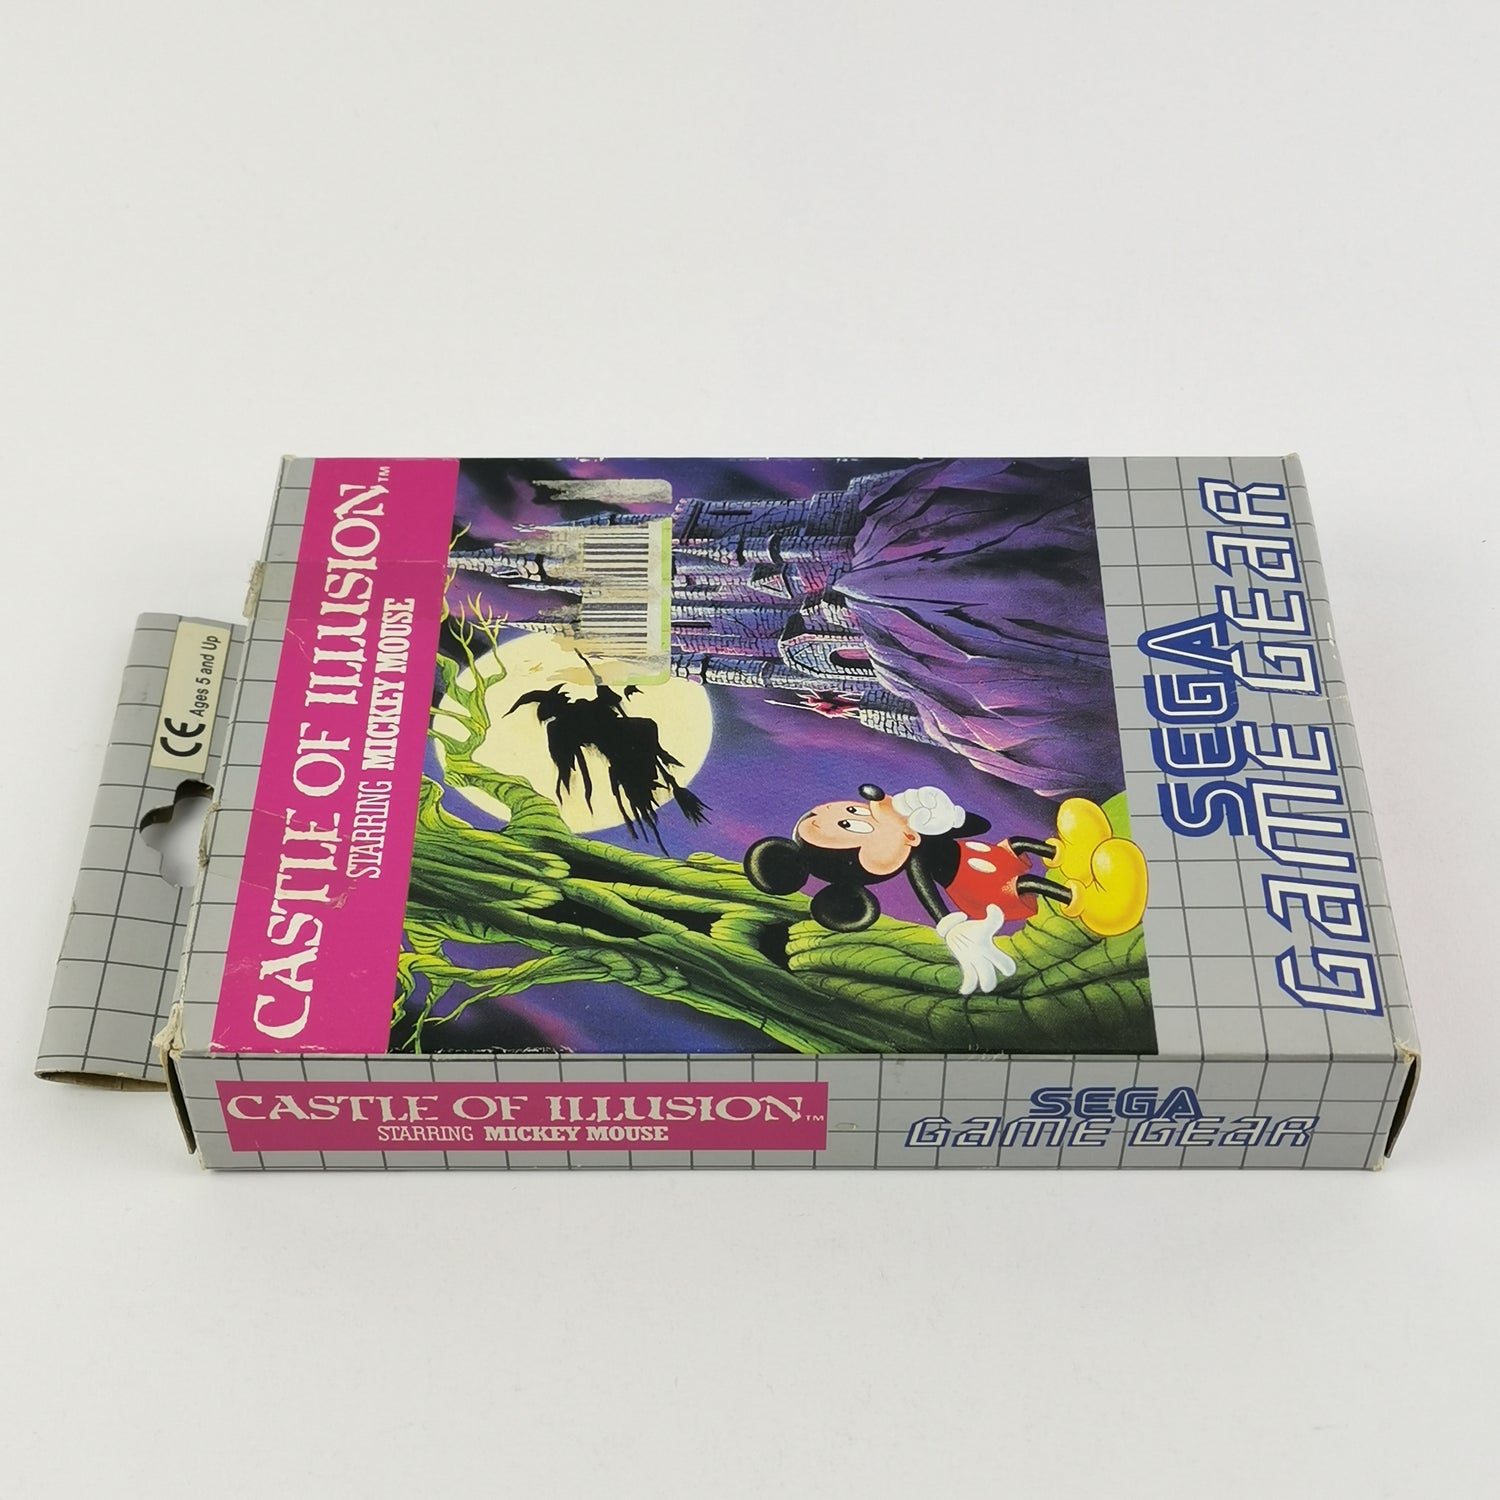 Sega Game Gear game: Castle of illusion - Mickey Mouse - original packaging and instructions PAL